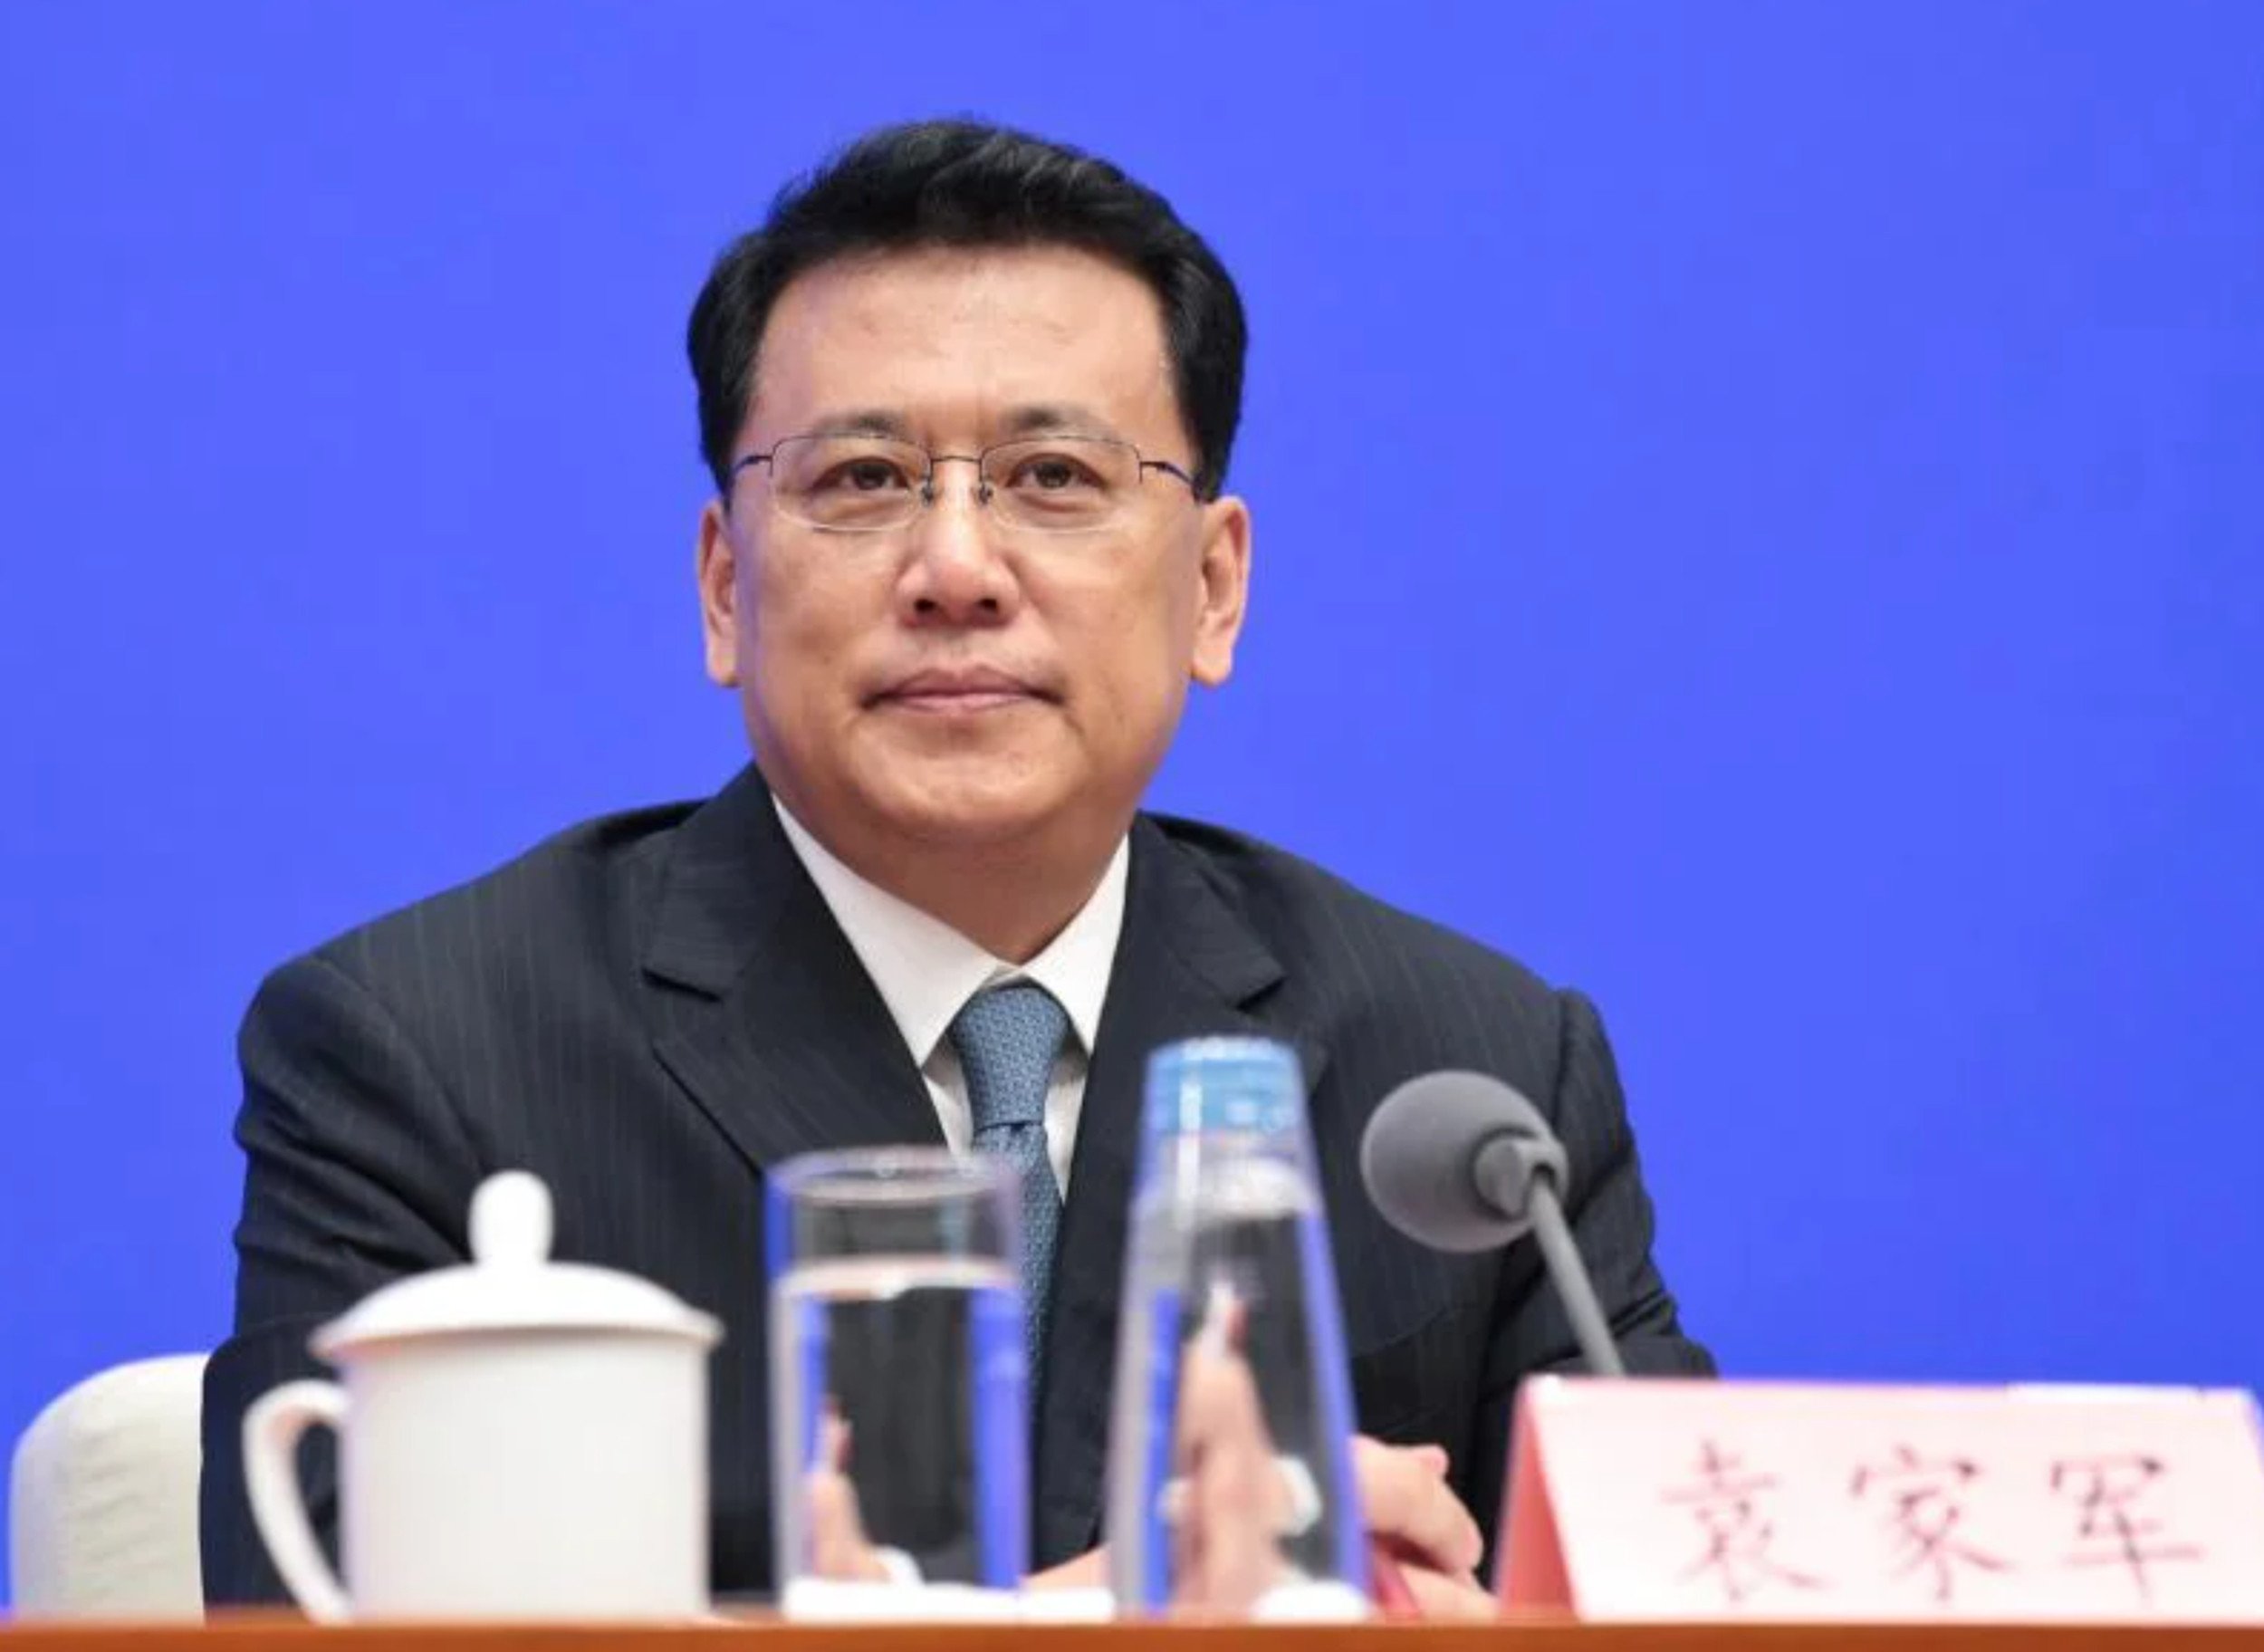 Rocket scientist Yuan Jiajun, who joined the decision-making Politburo in October, has been appointed party secretary of mega city Chongqing in southwest China. Photo: Handout